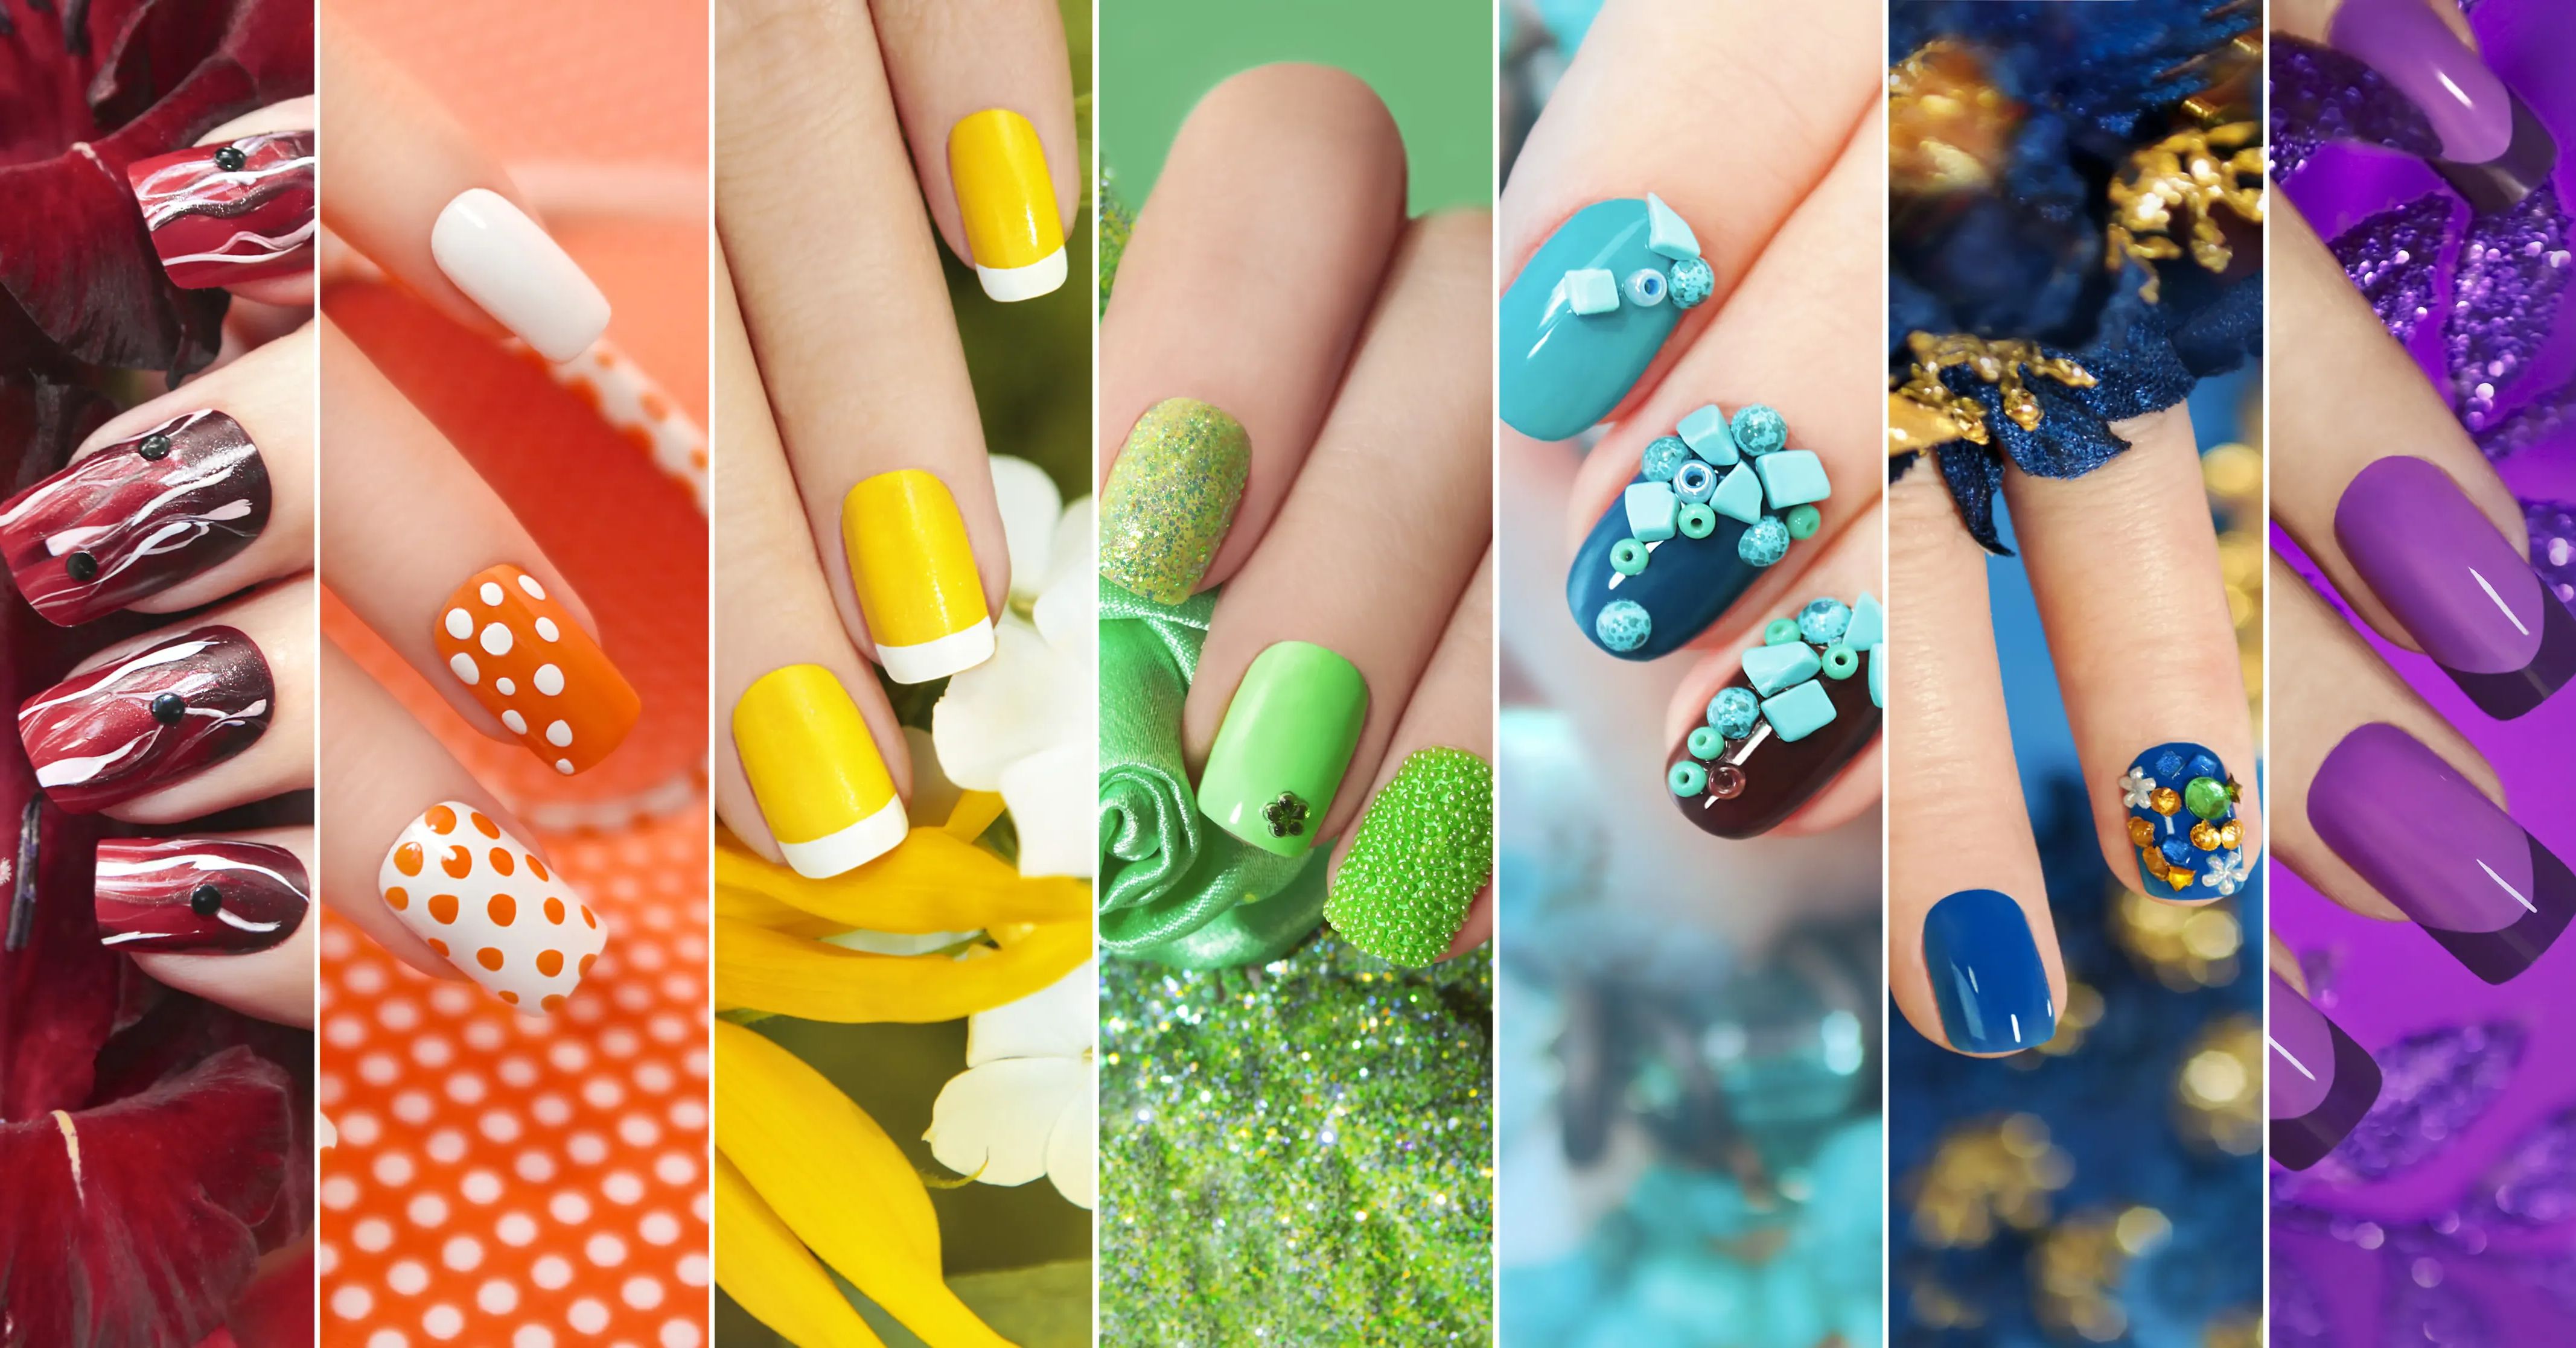 3. Download Free Nail Art Magazine Issues - wide 9